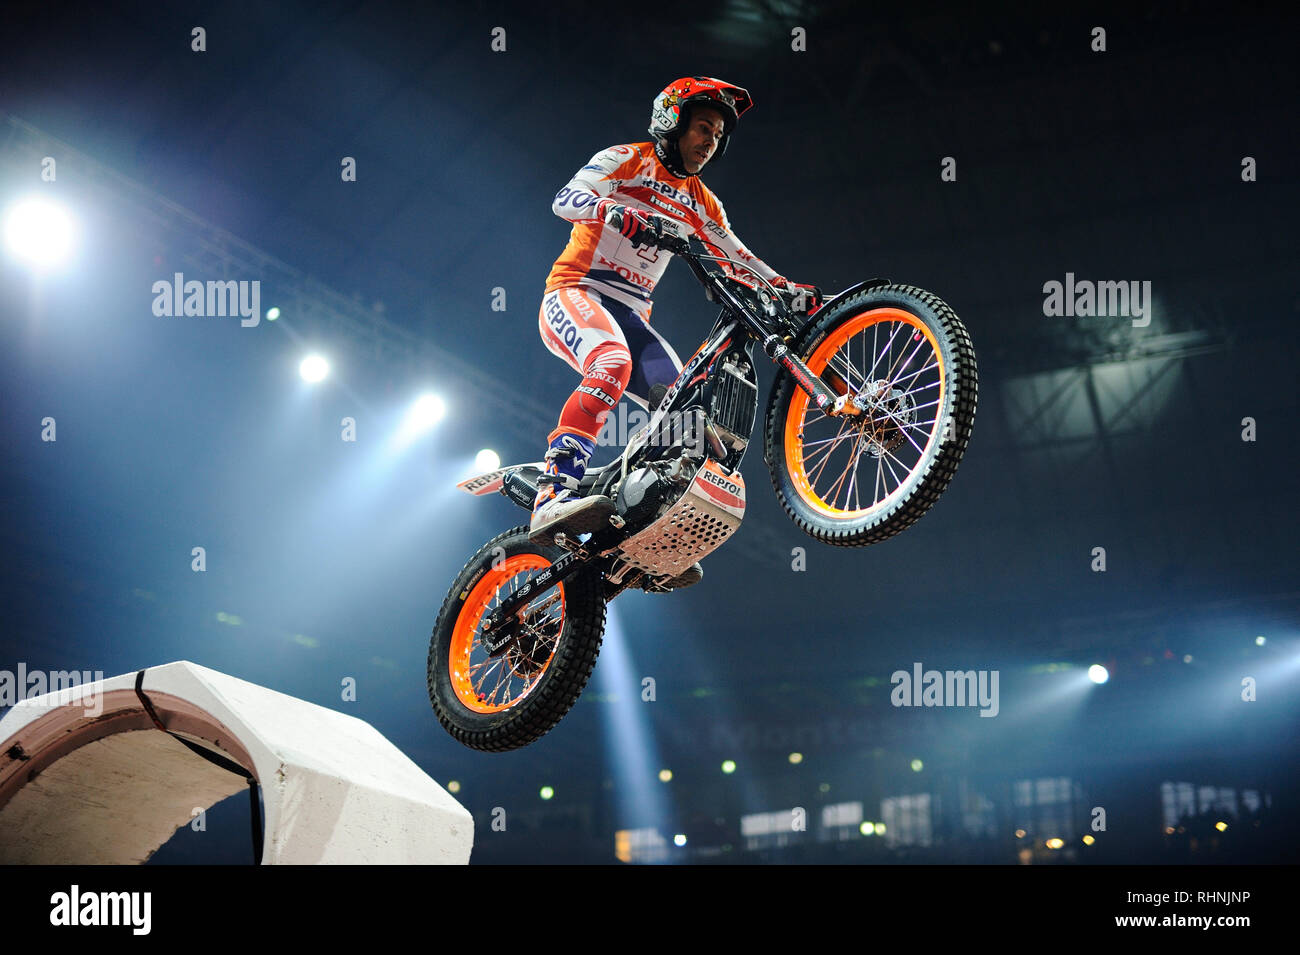 Barcelona, Spain 3rd February, 2019. Toni Bou of the Repsol Honda Team in  action during the